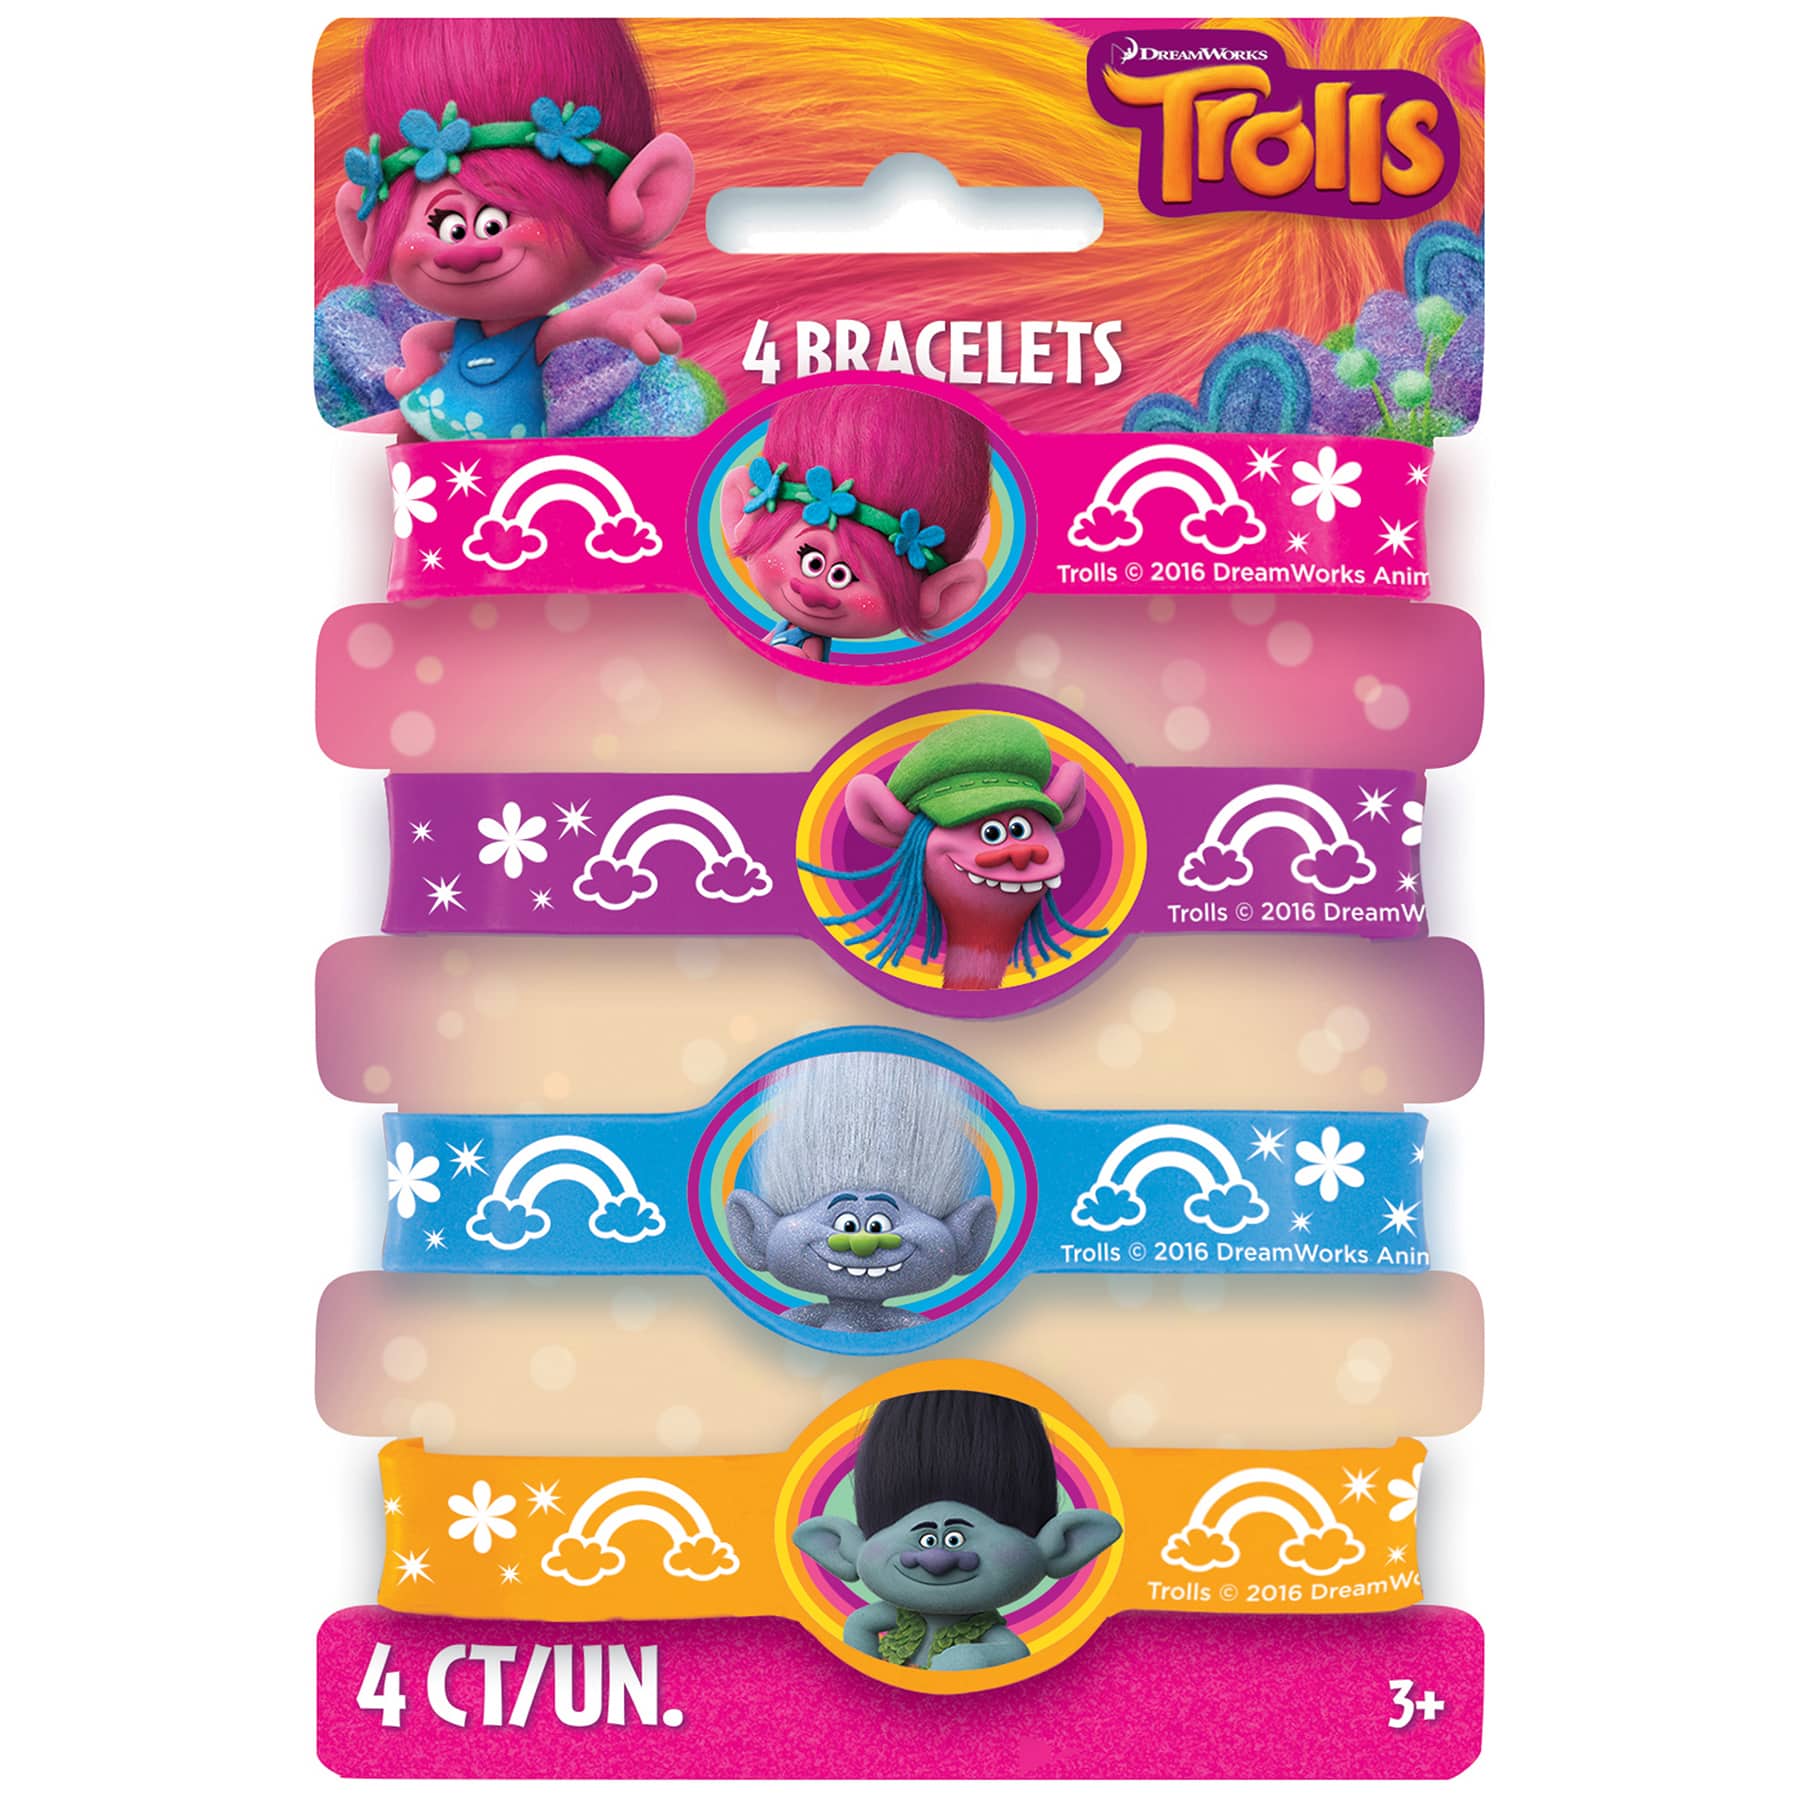 DREAMWORKS TROLLS* School Supplies GIFTS Party Favors FOR KIDS New *YOU CHOOSE* 